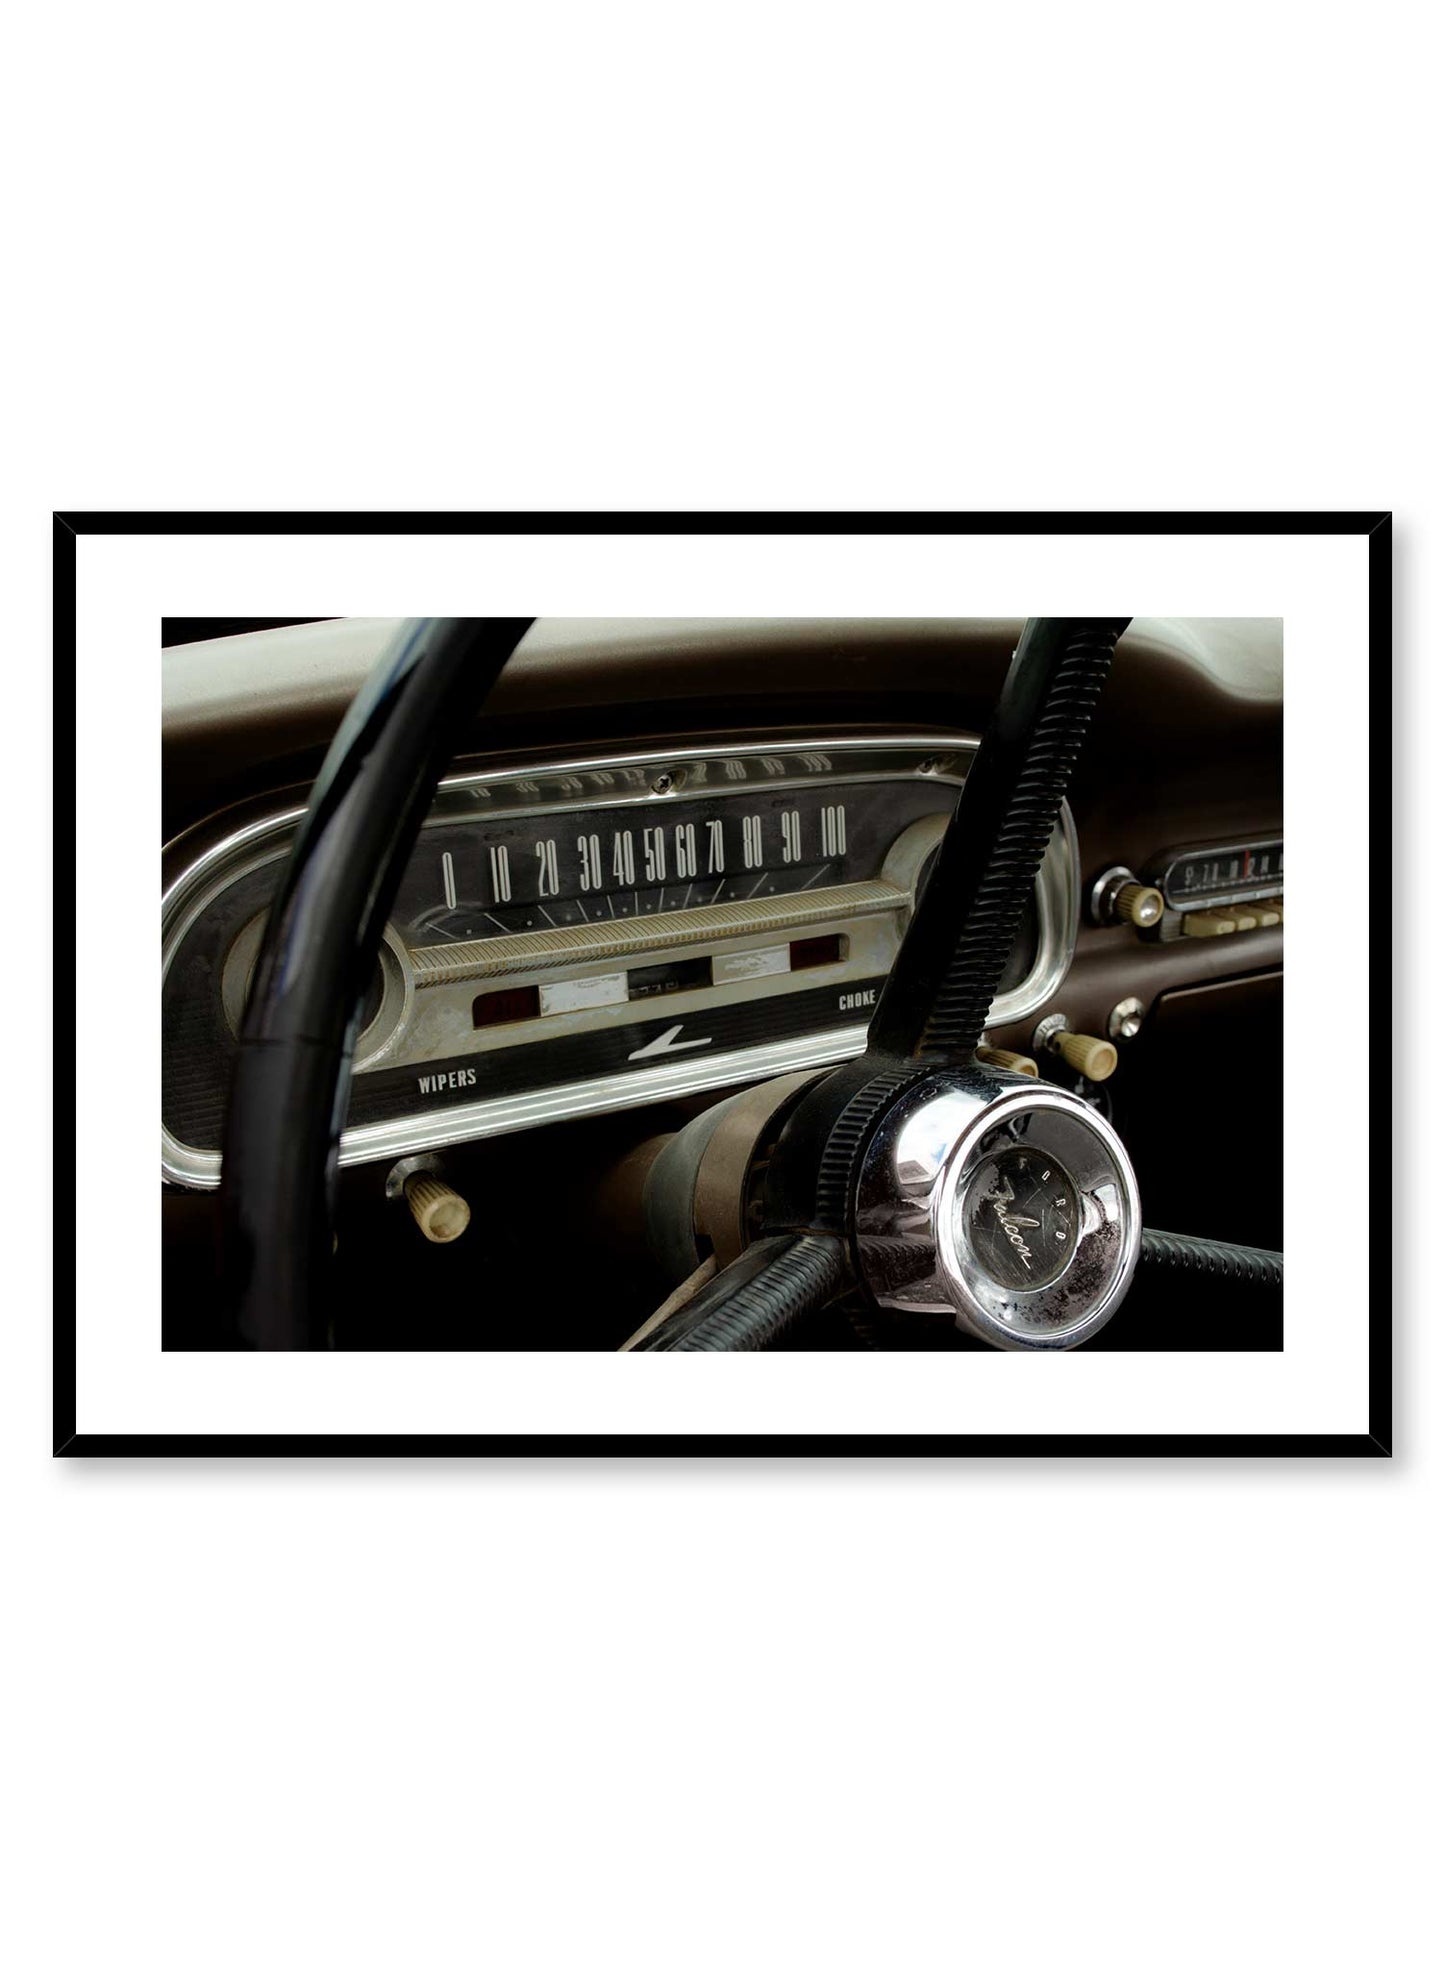 Beep Beep! is a vintage photography poster of a 60's Ford Falcon's steering wheel and dashboard by Opposite Wall.